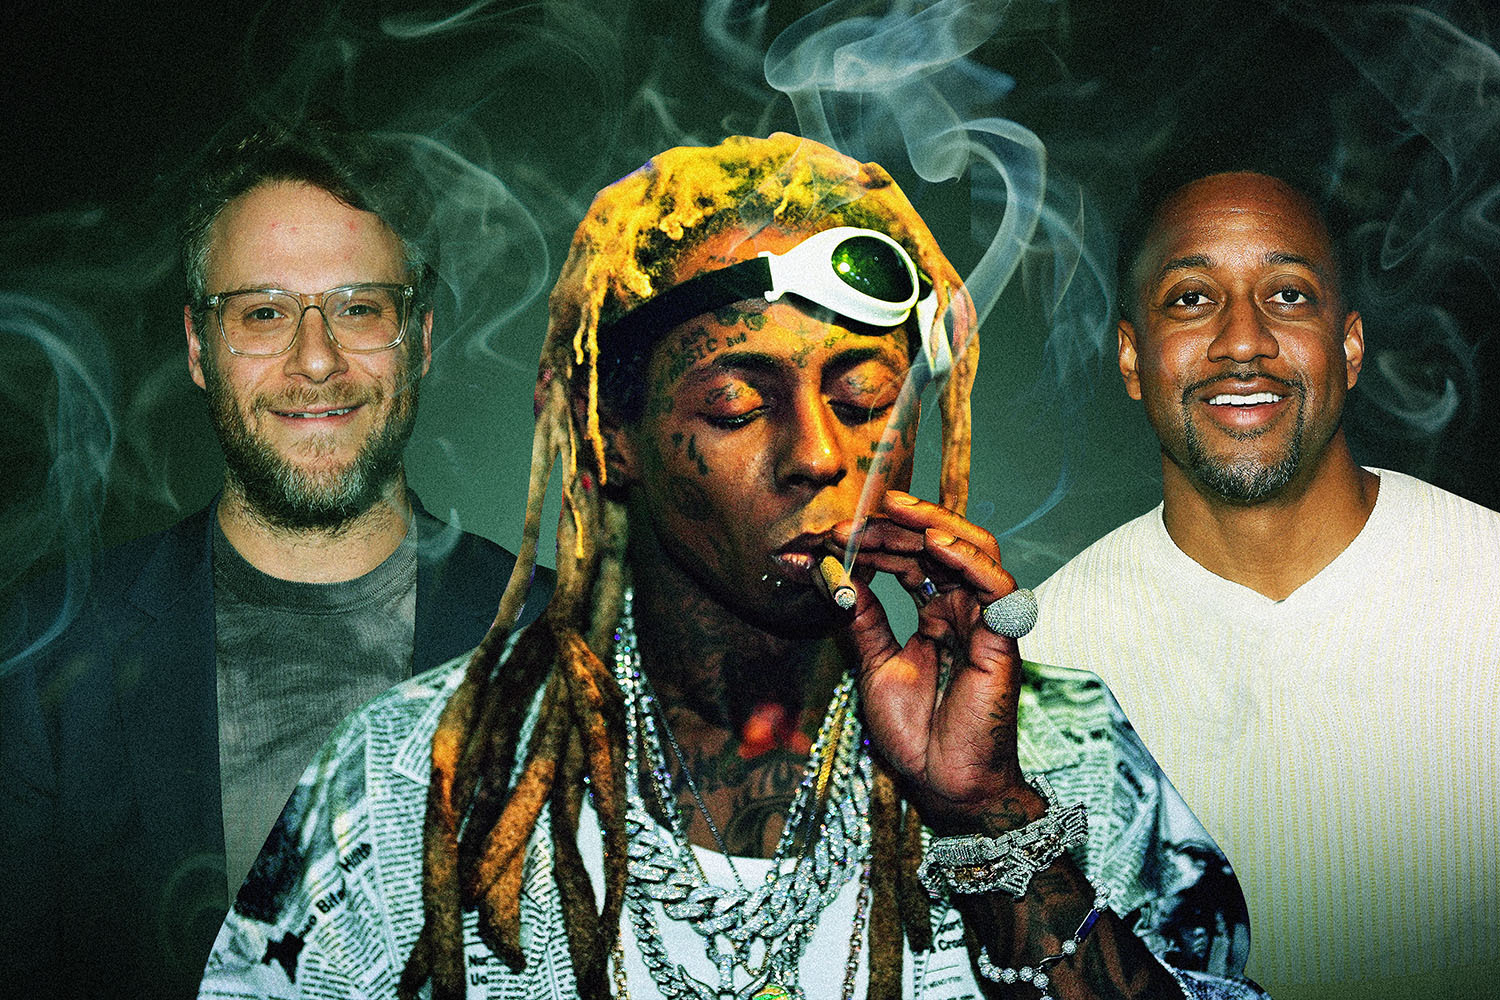 Seth Rogen, Lil Wayne and Jaleel White are just some of the dozens of celebrities with cannabis brands